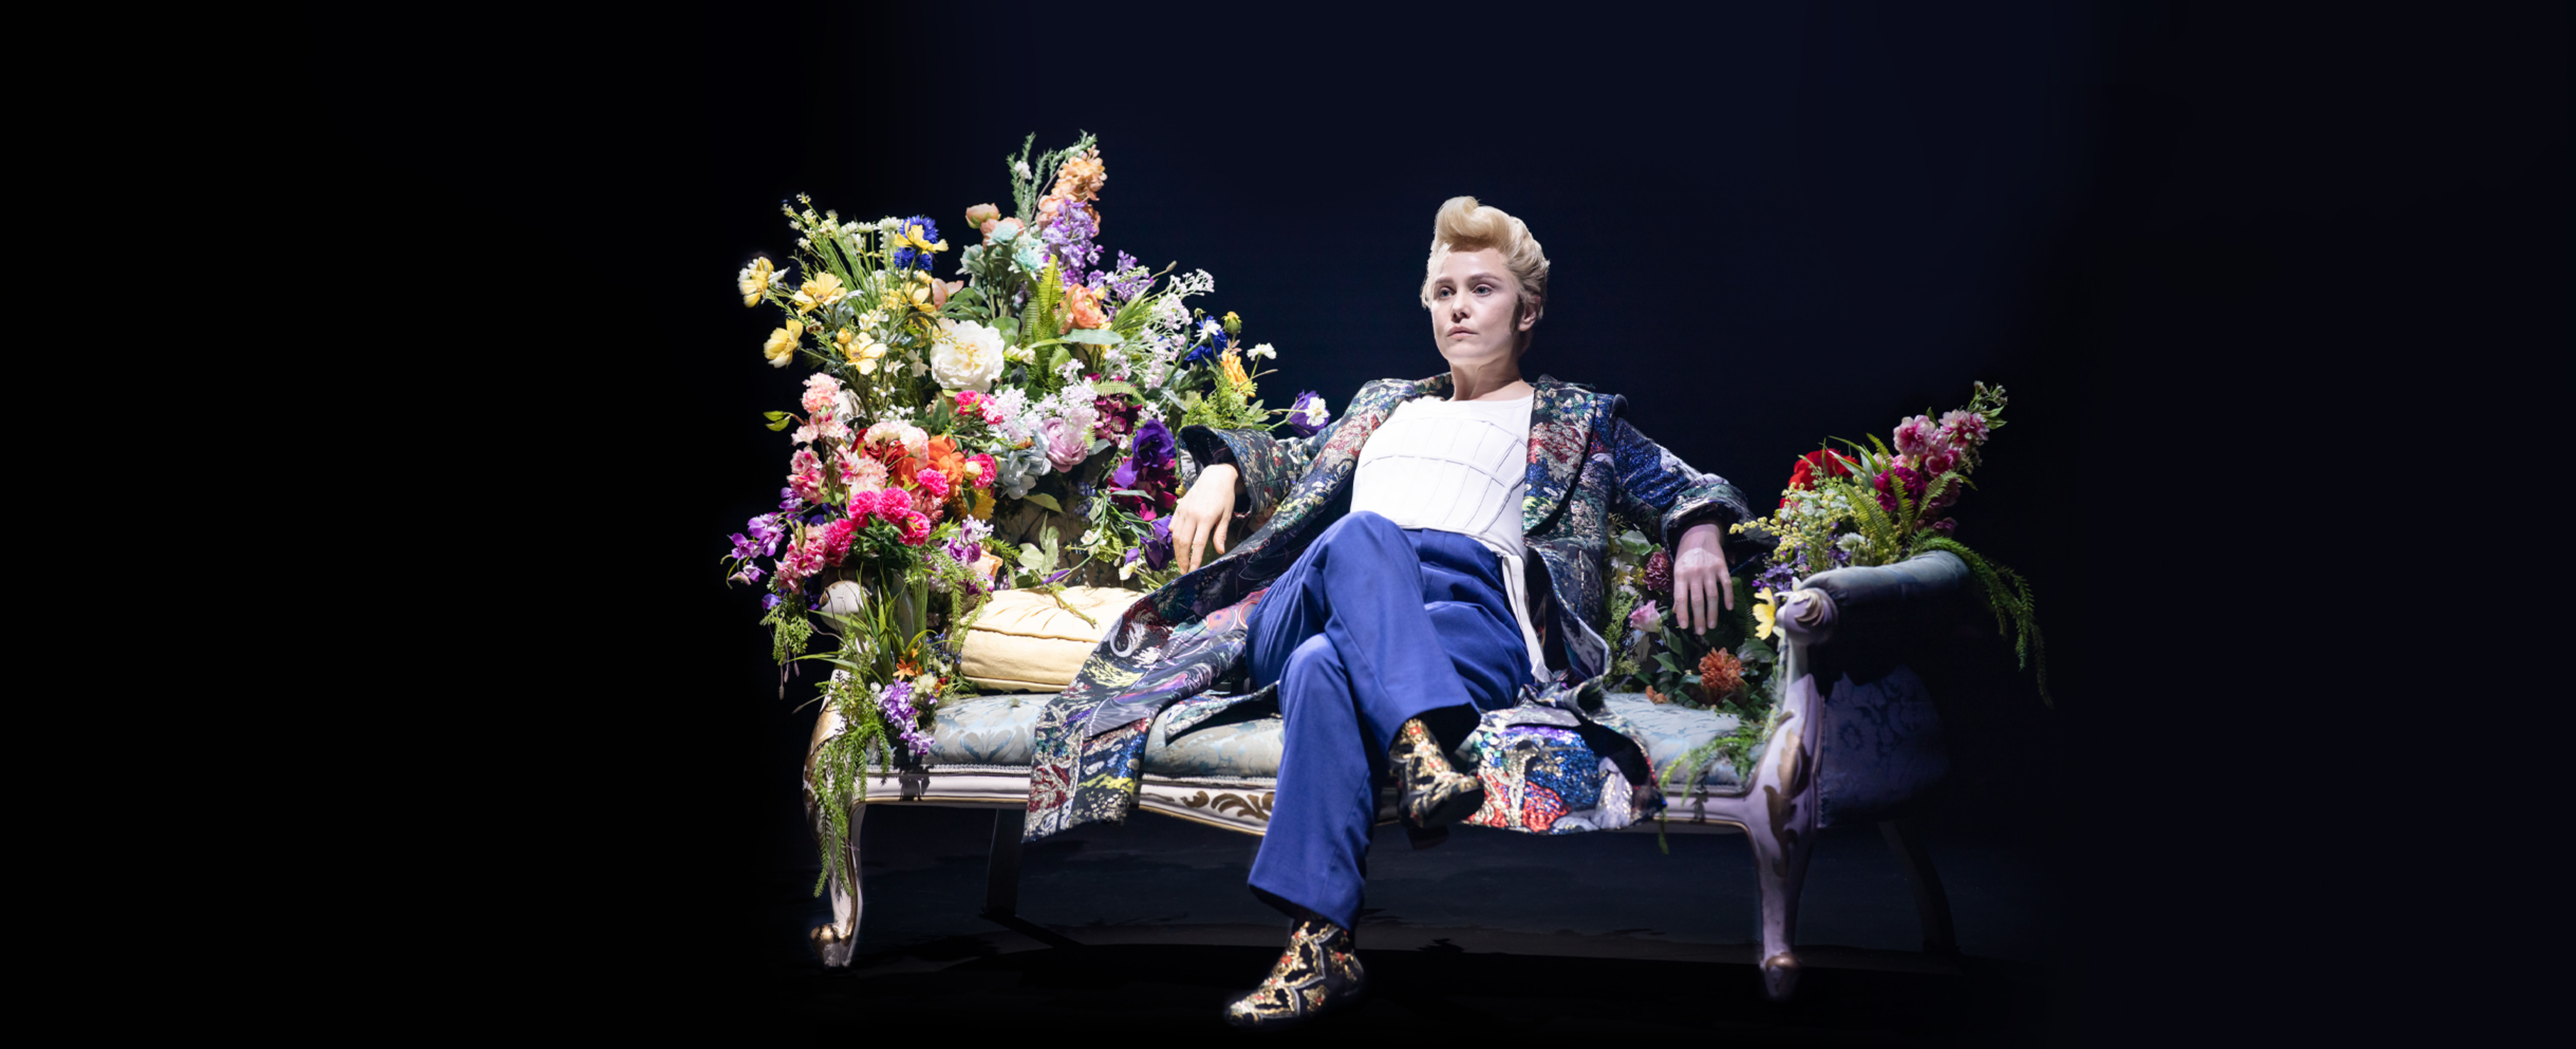 Actor Eryn Jean Norvill sits on a chaise longue with large bouquets of colourful flowers on either side. She is wearing an ornate jacket and boots paired with a white t-shirt and blue trousers.